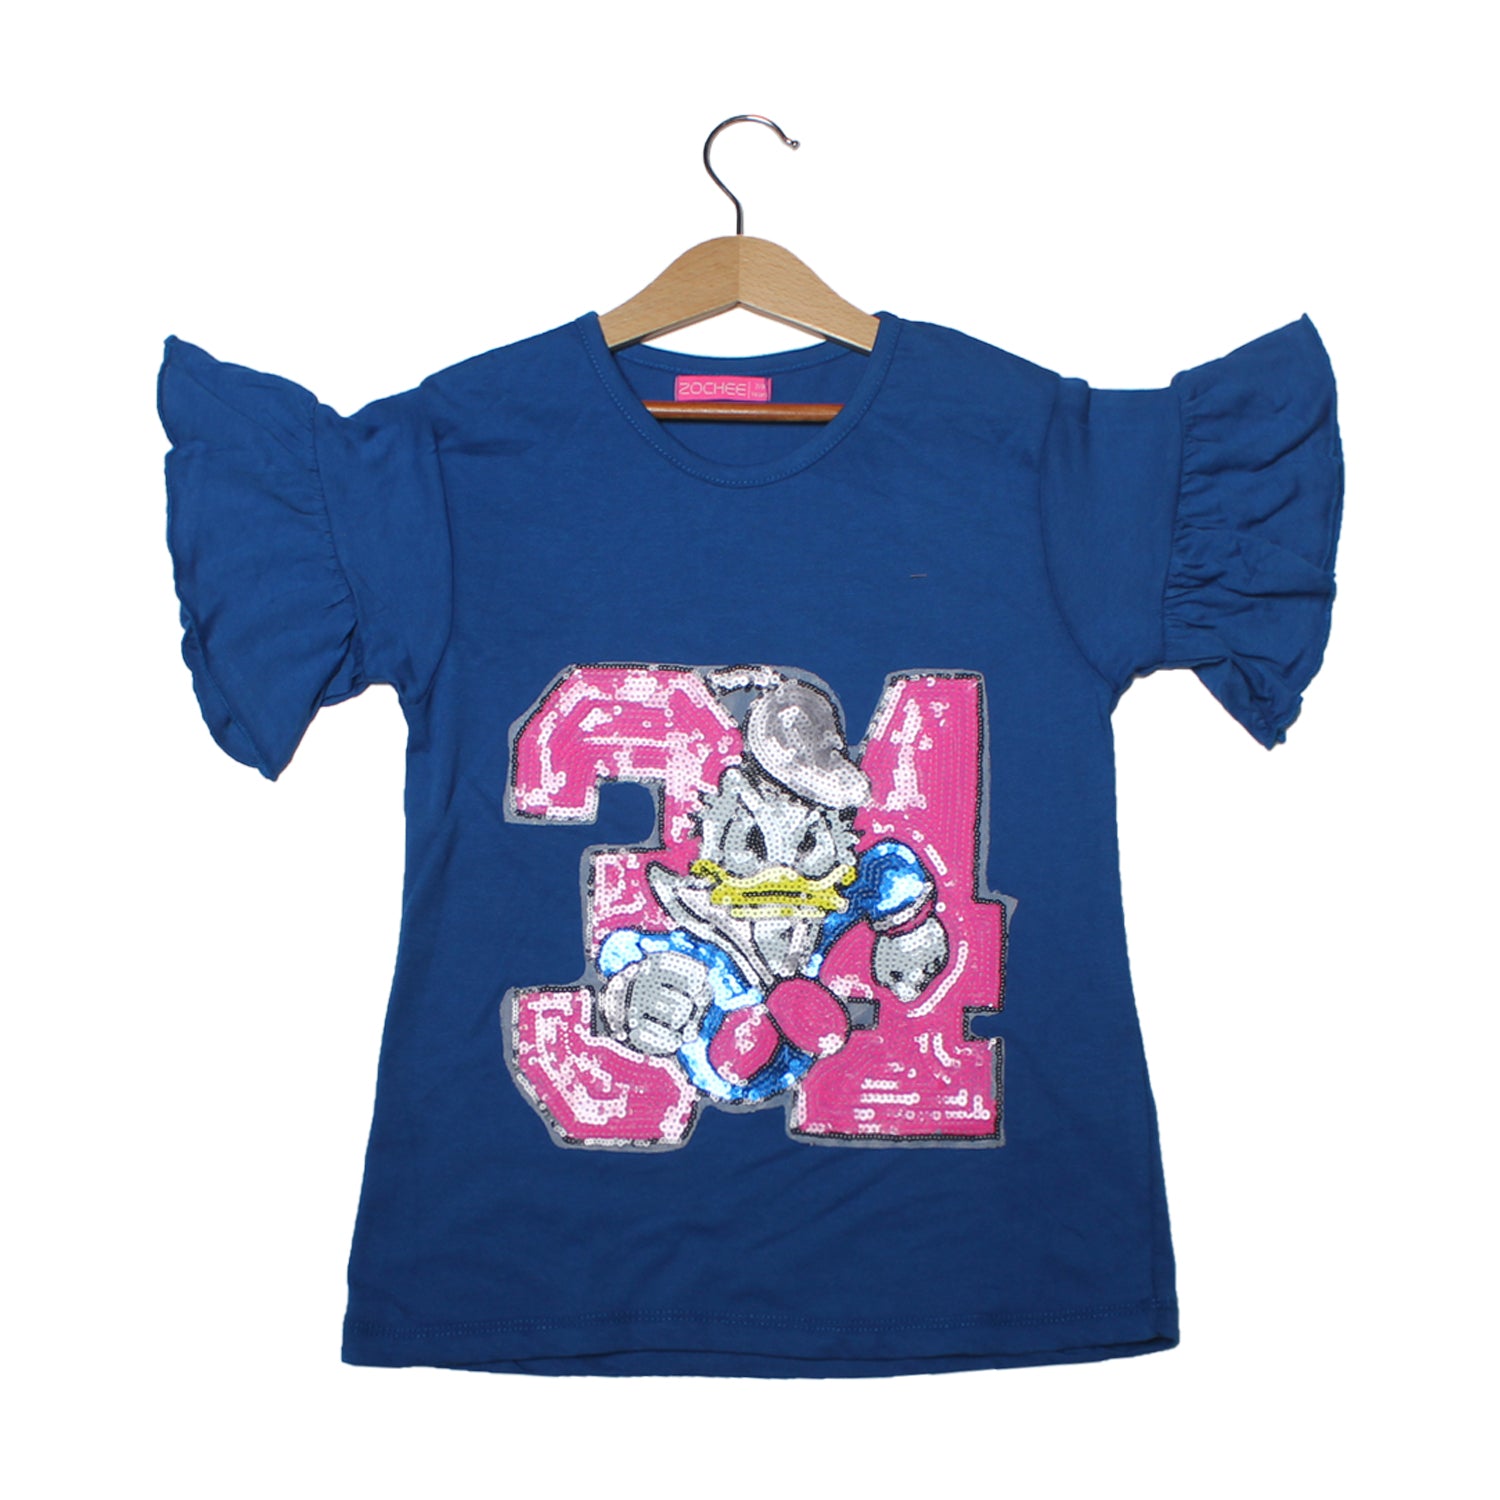 NEW ROYAL BLUE DUCK PRINTED T-SHIRT TOP FOR GIRLS